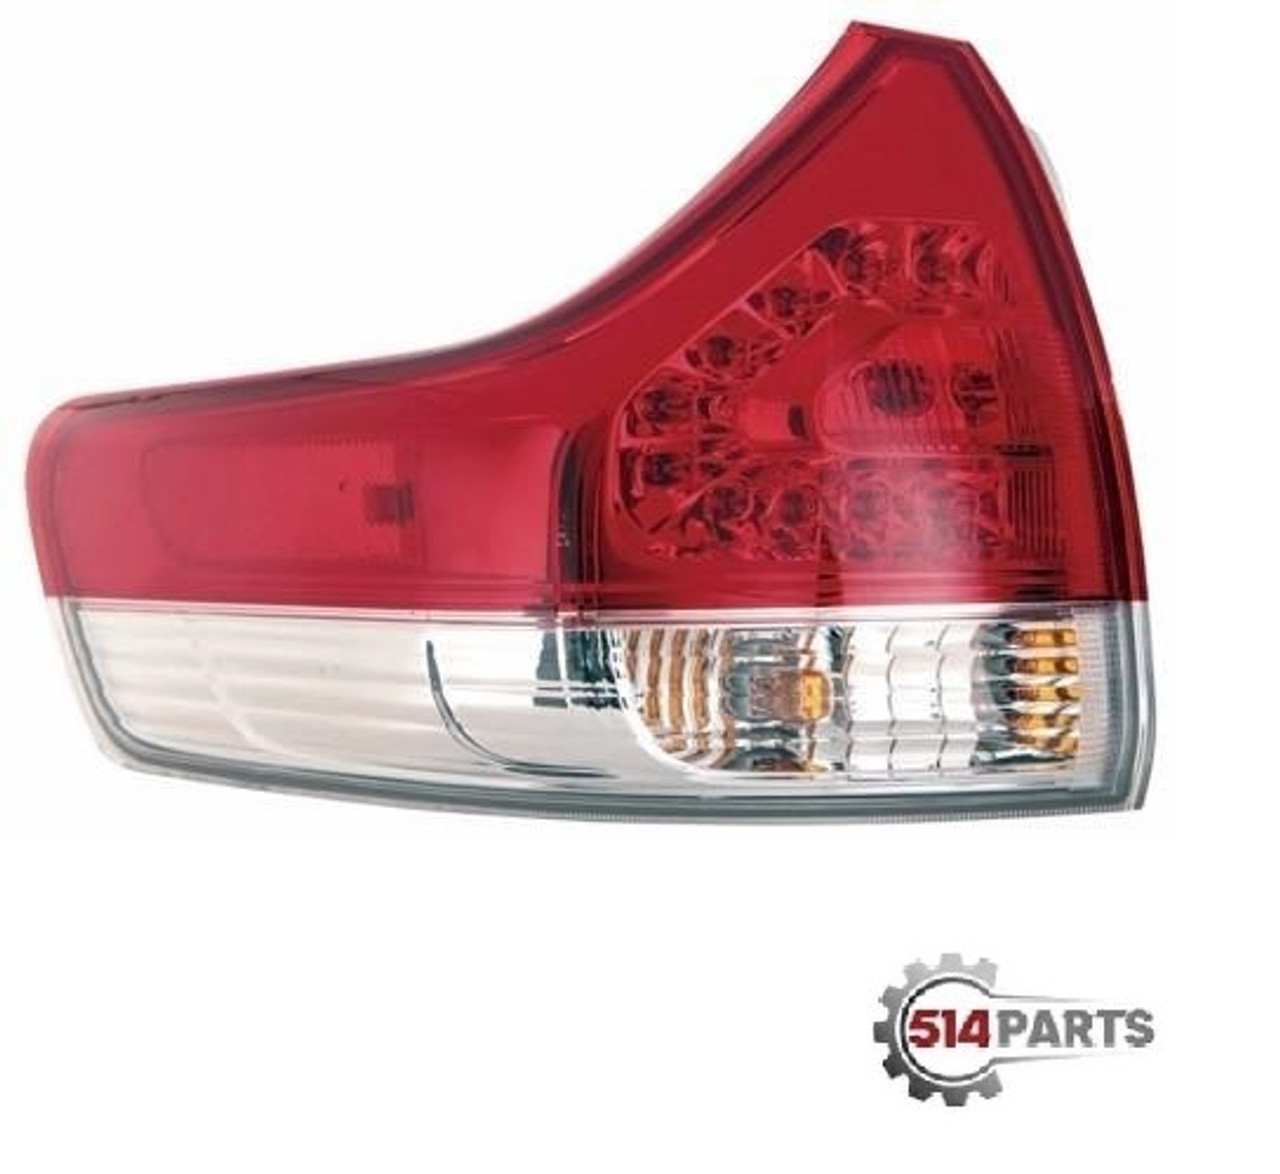 2011 - 2014 TOYOTA SIENNA TAIL LAMP (EXCLUDE SE MODEL) High Quality - FEU ARRIERE(EXCLUDE MODELE SE) Haute Qualite